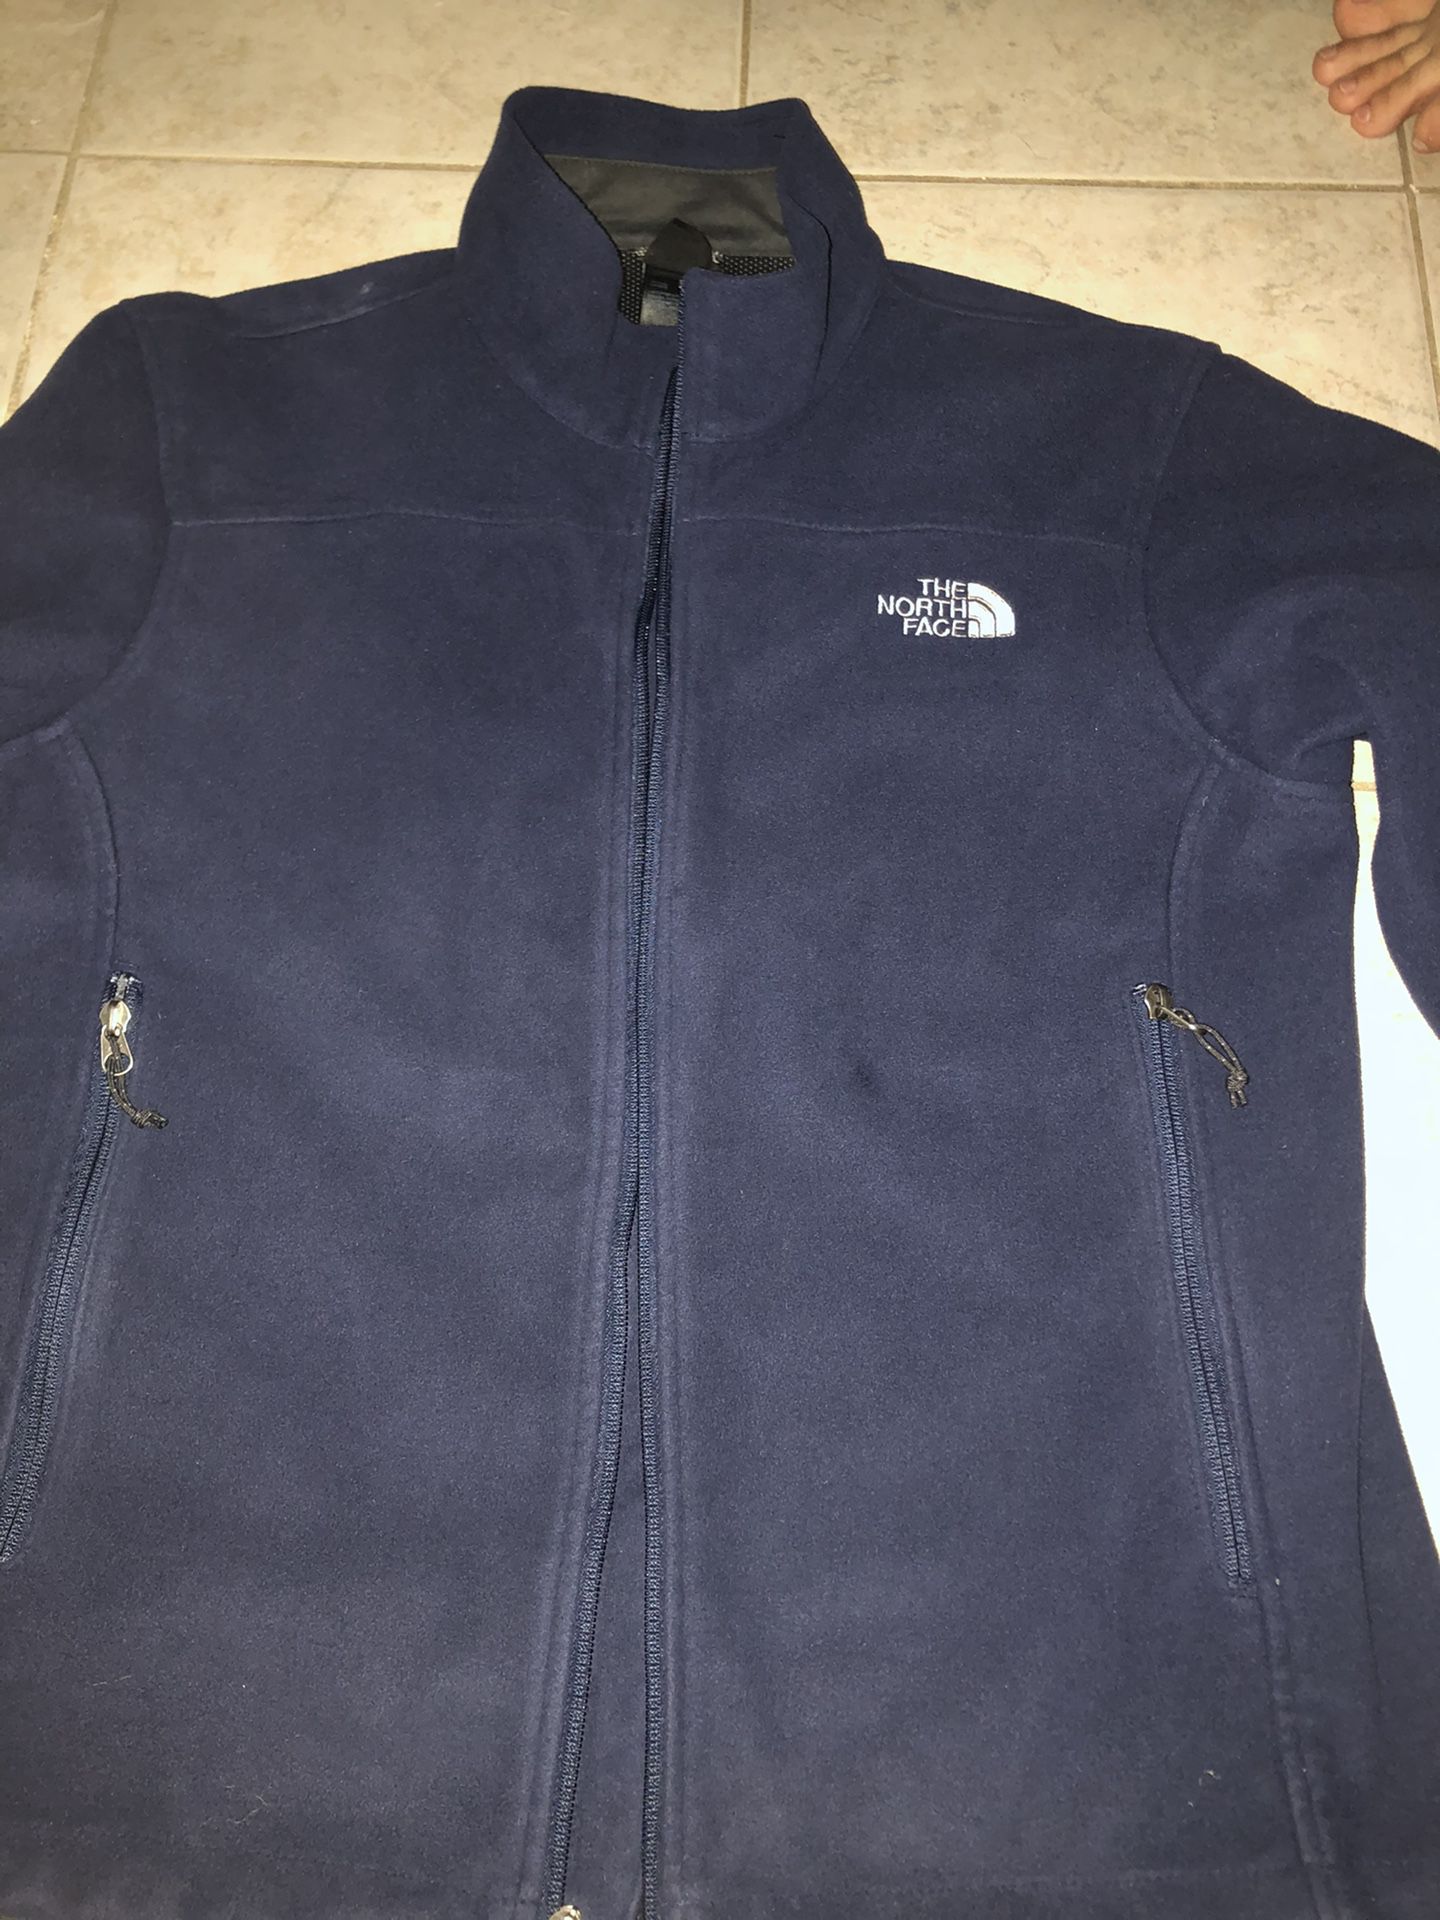 The North Face men jacket size M